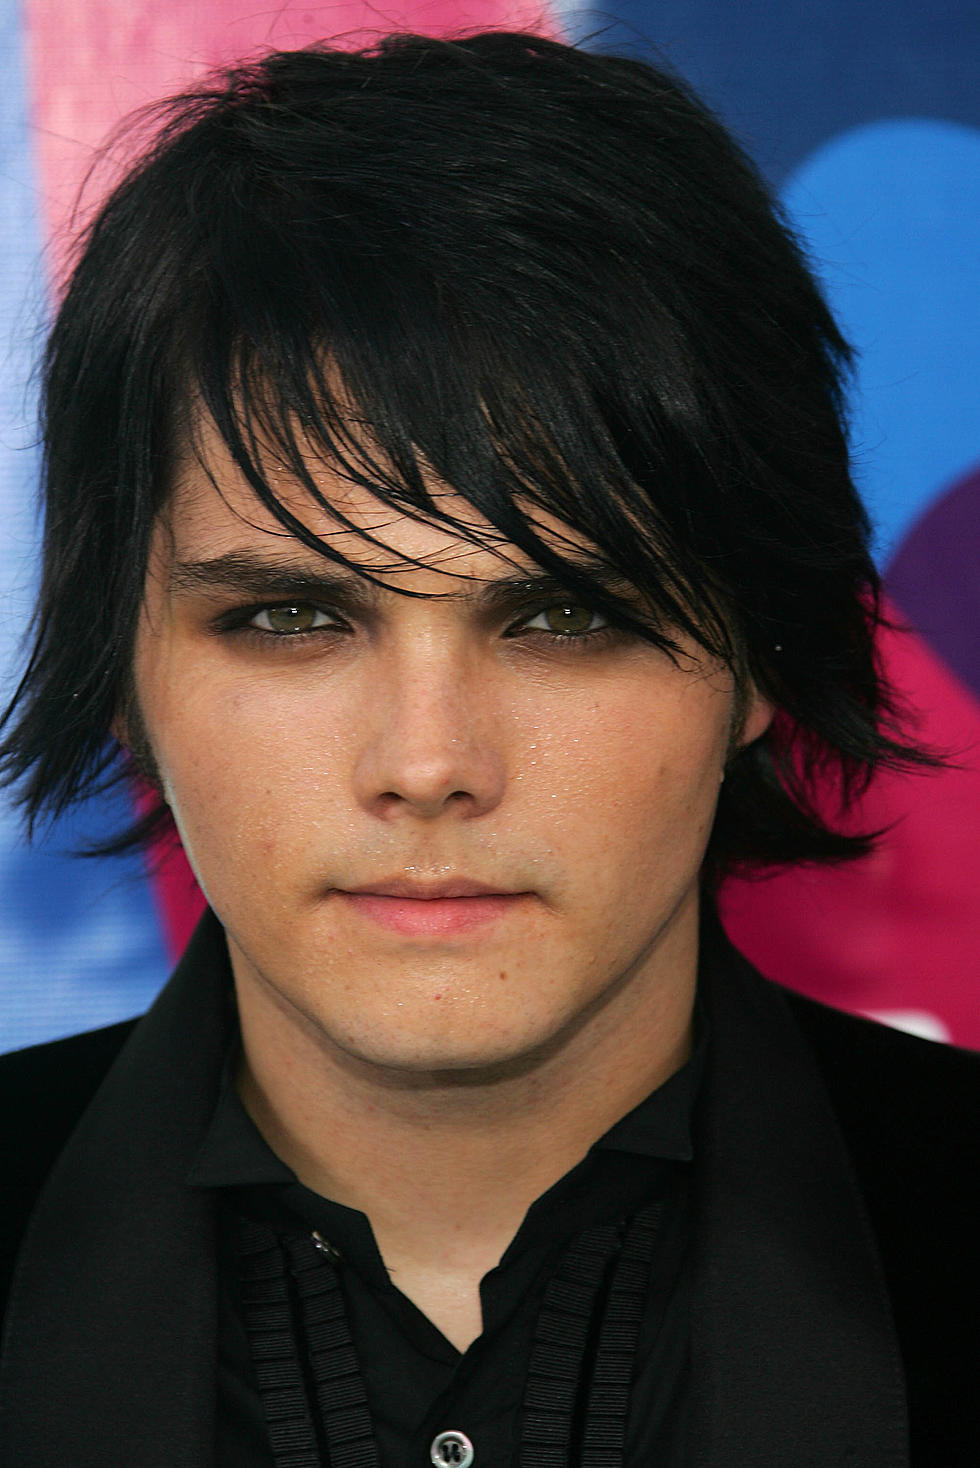 There’s More Than One Hot Gerard (VIDEOS)